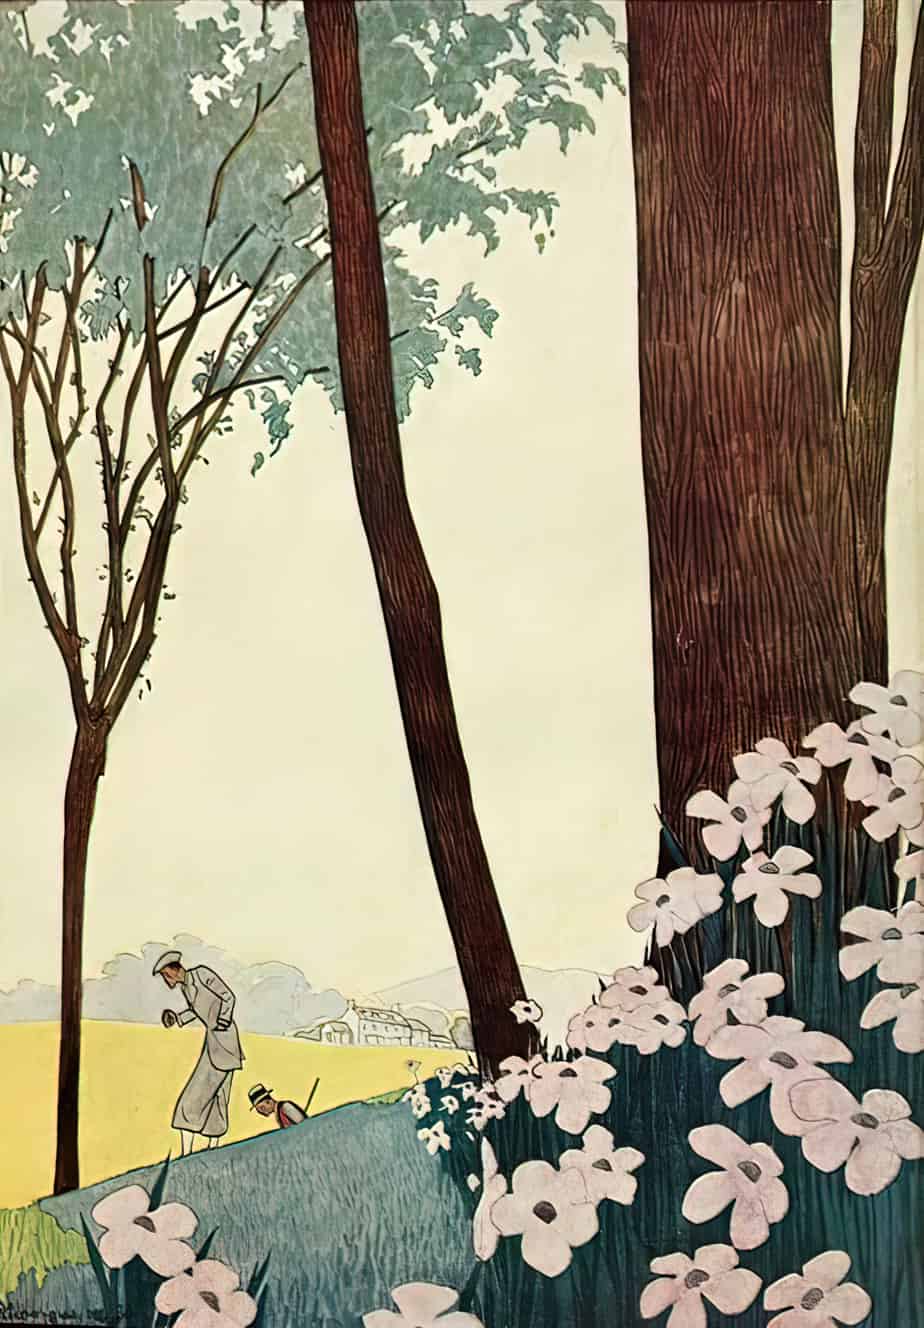 House & Garden Magazine October 1930. Two men hunt for something, but who knows what? Are we supposed to think that's a gun? The flowers in the foreground suggest instead a rake. They are probably hunting for flowers.